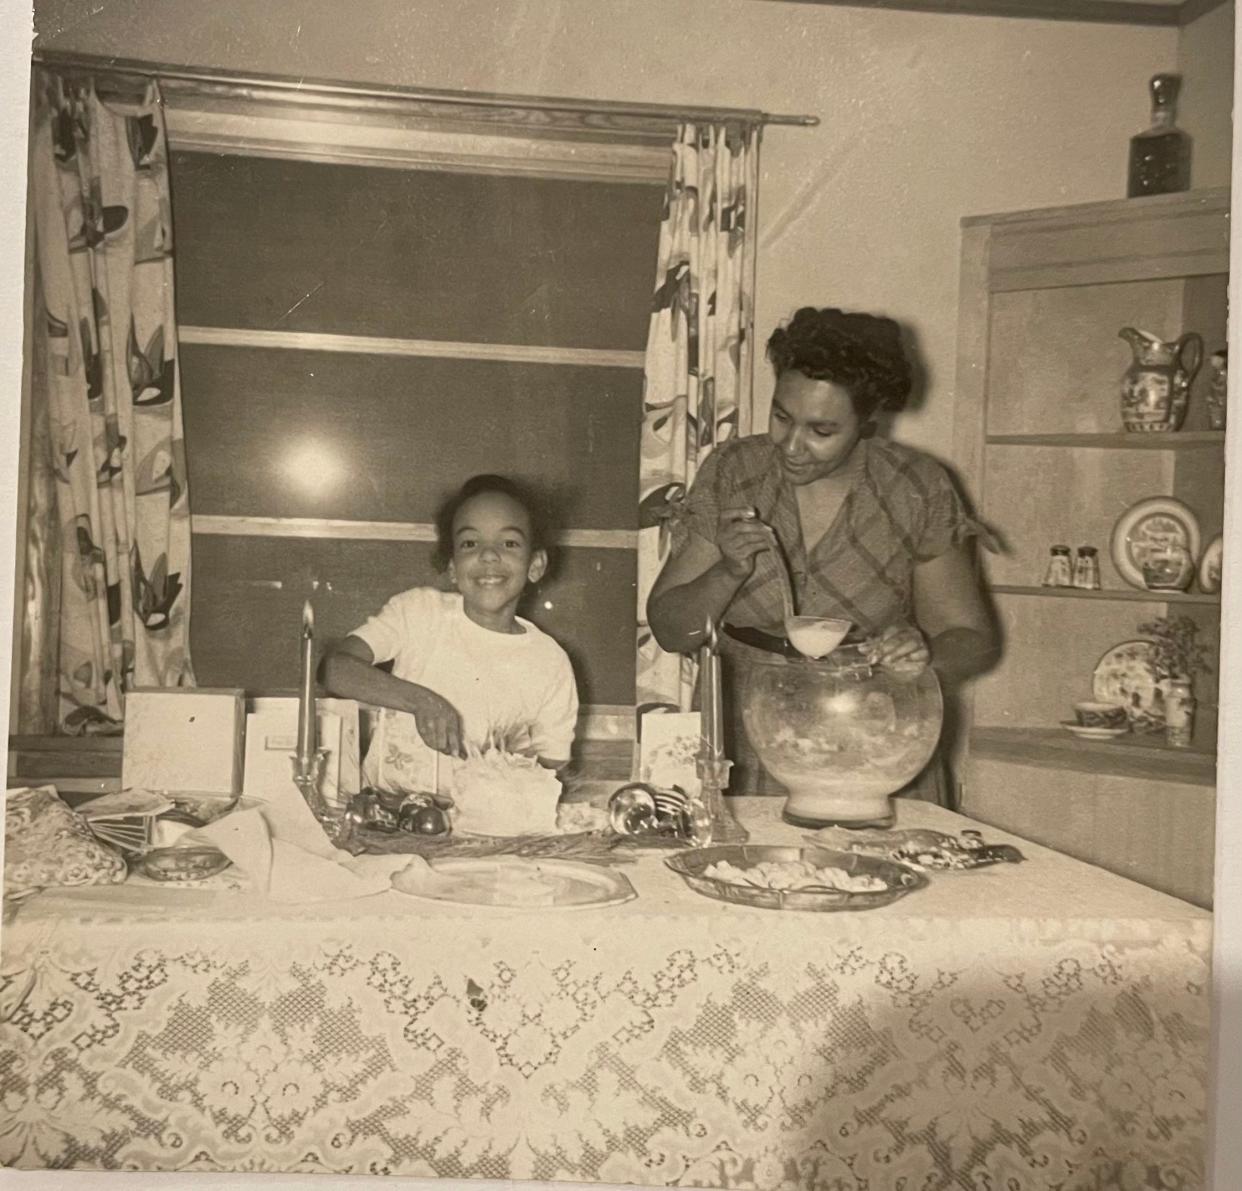 Khadija "Cookie" Reeves (left) alongside her mother Lois Lambert Reeves (right) at 218 Bibb Street, located at the Tuskegee Institute of Technology in Alabama.